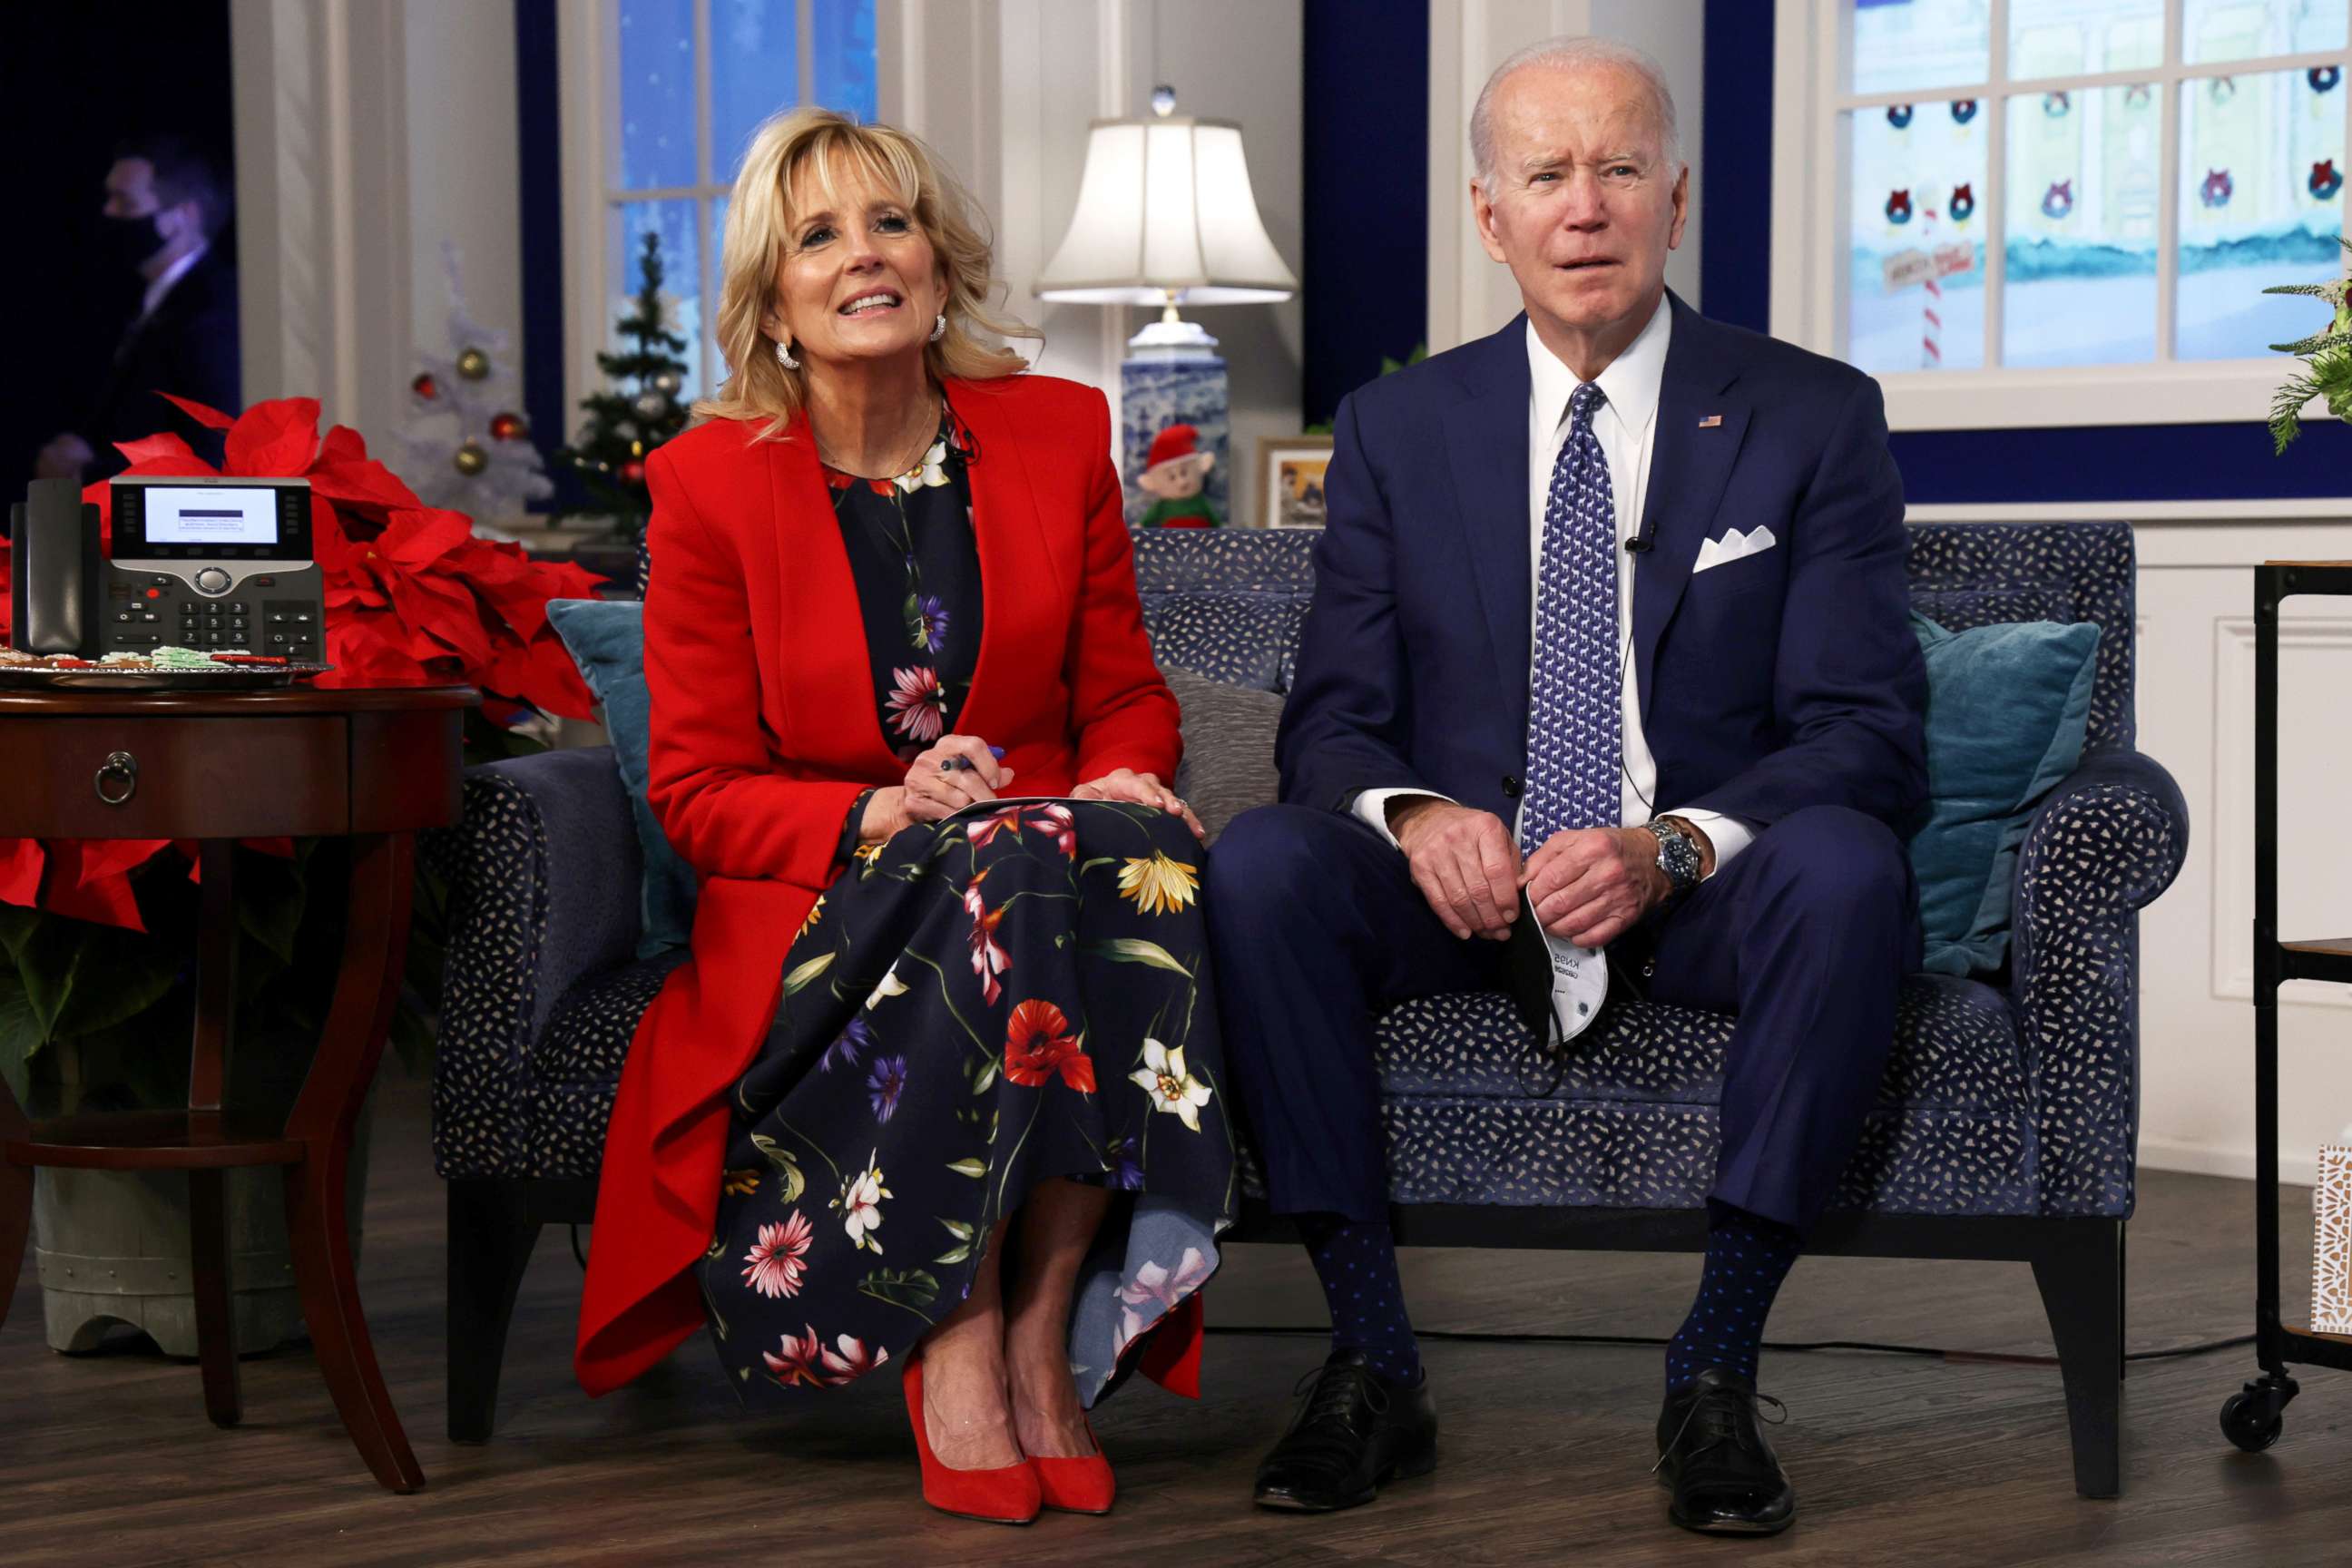 PHOTO: President Joe Biden and first lady Dr. Jill Biden participate in an event to call NORAD and track the path of Santa Claus on Christmas Eve in the South Court Auditorium of the Eisenhower Executive Building, Dec. 24, 2021 in Washington, DC.